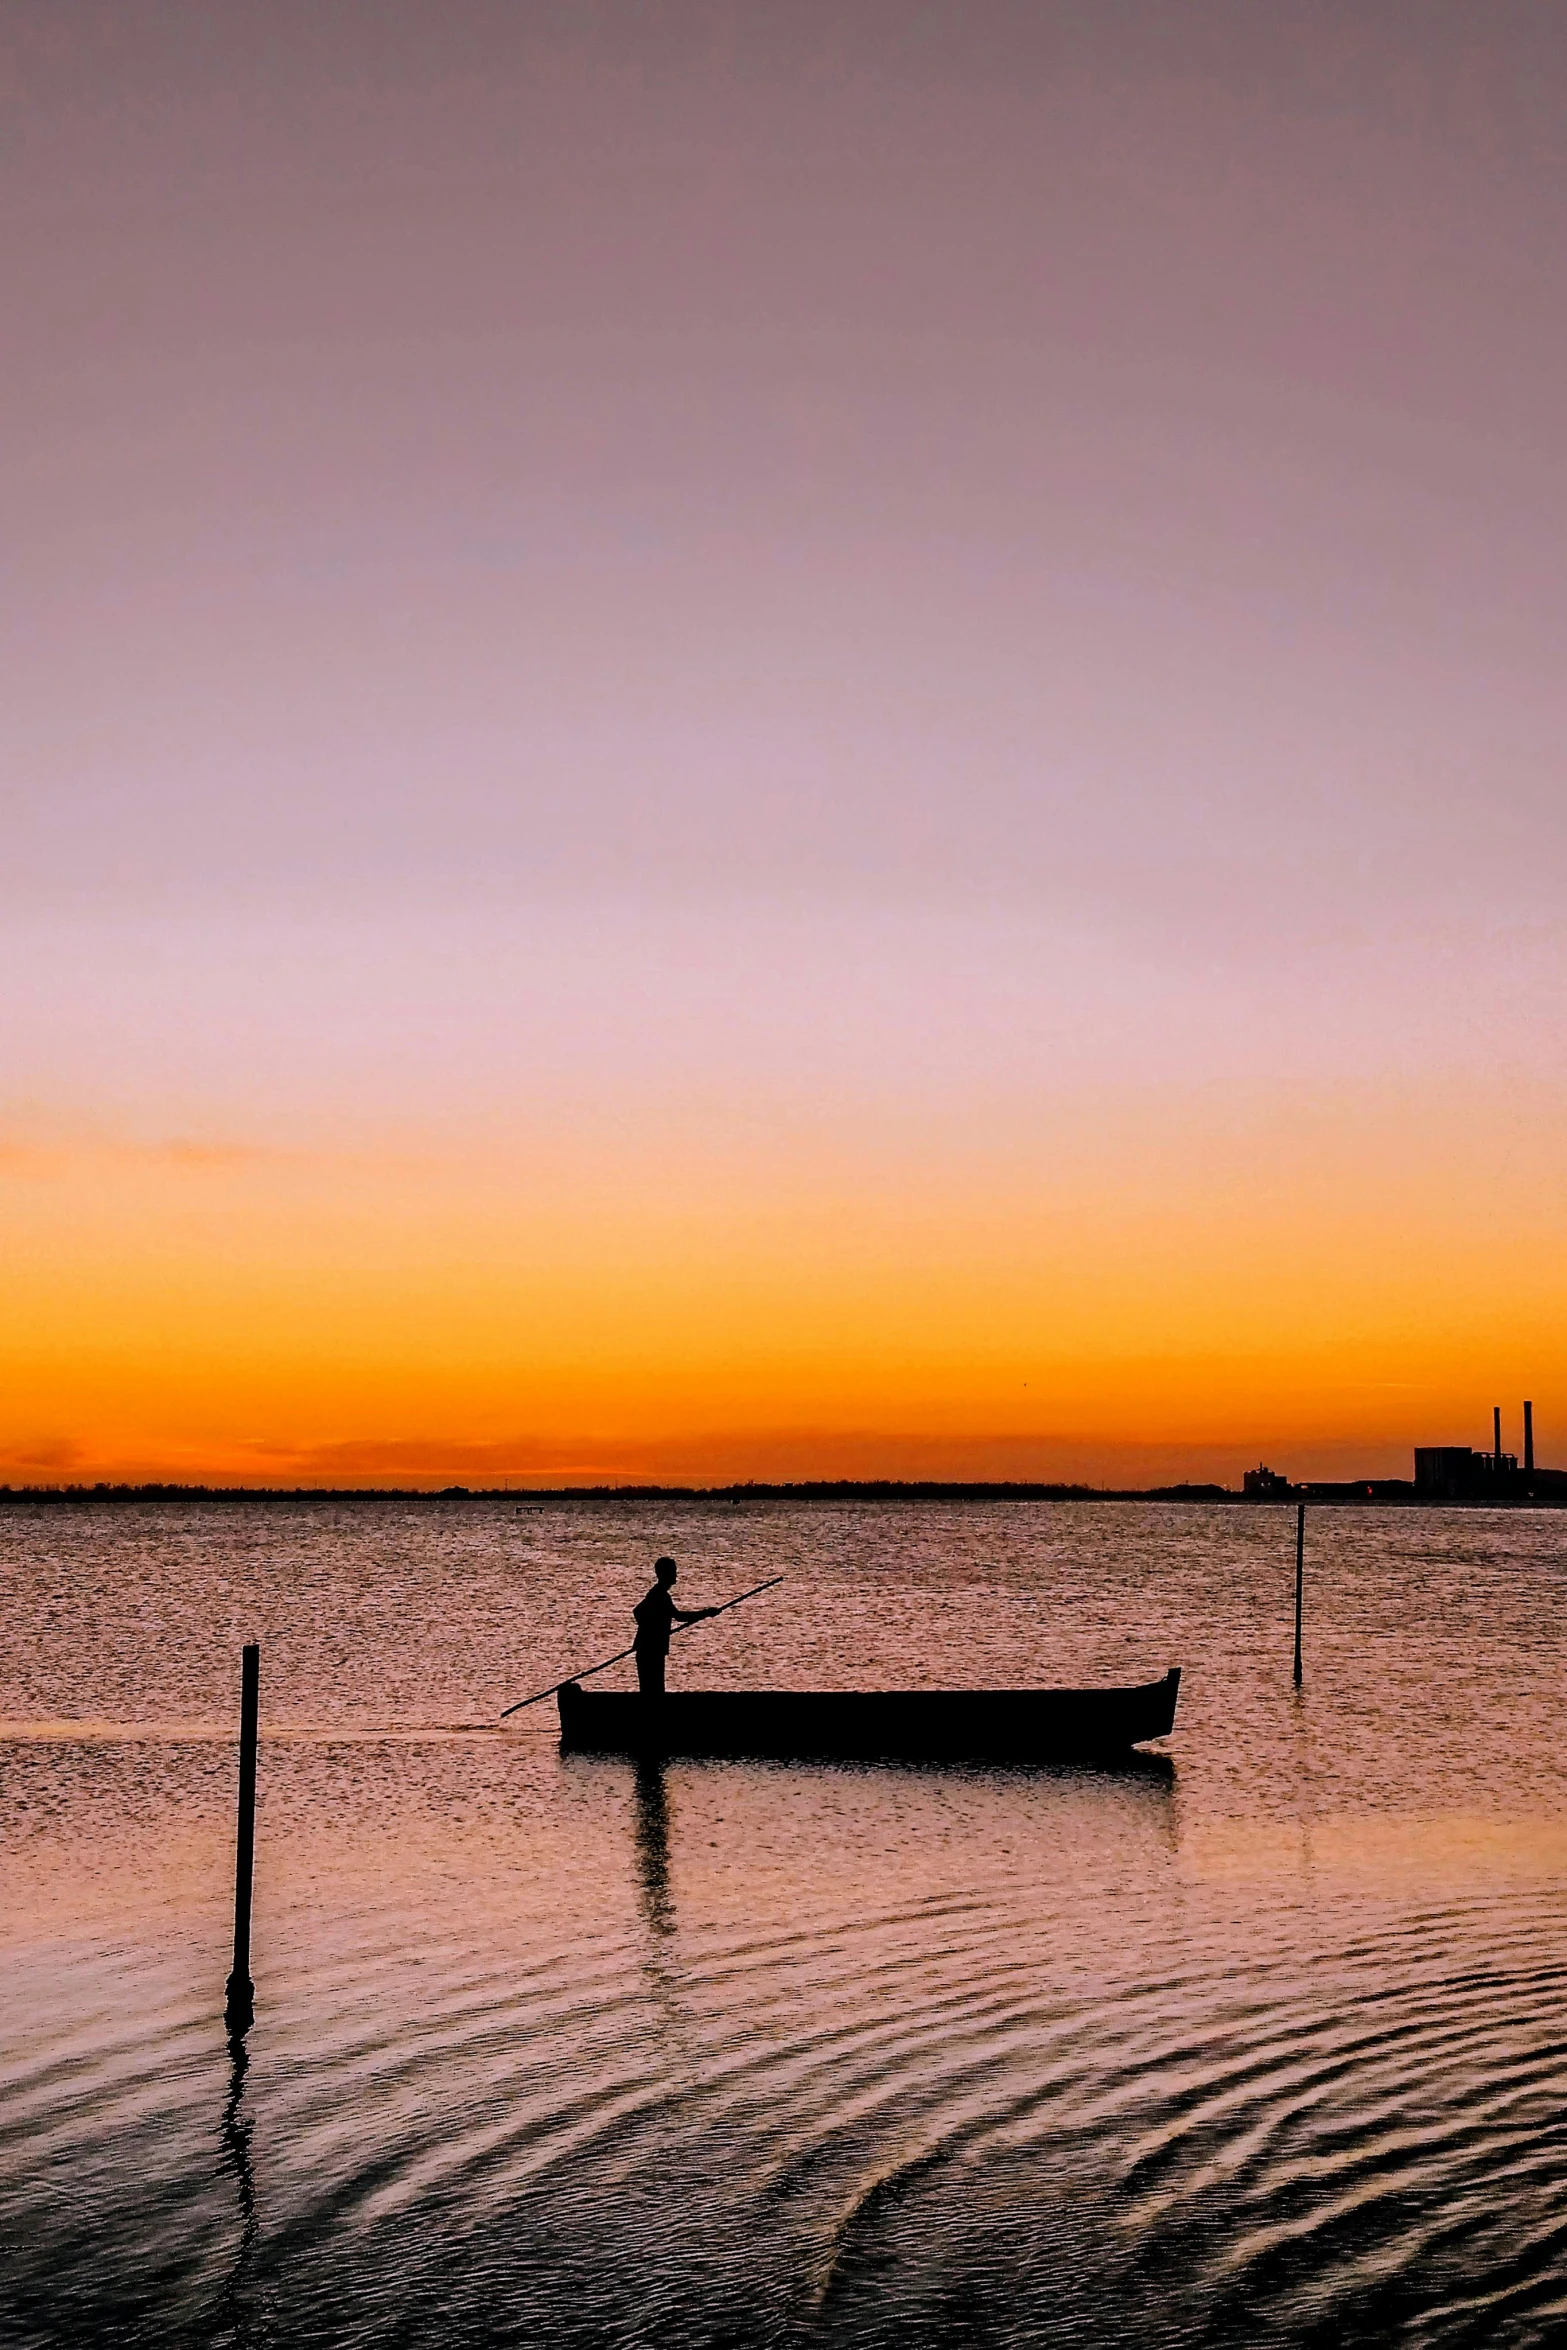 a person in a boat on a body of water, a picture, at sunset, lisbon, islands on horizon, fishing